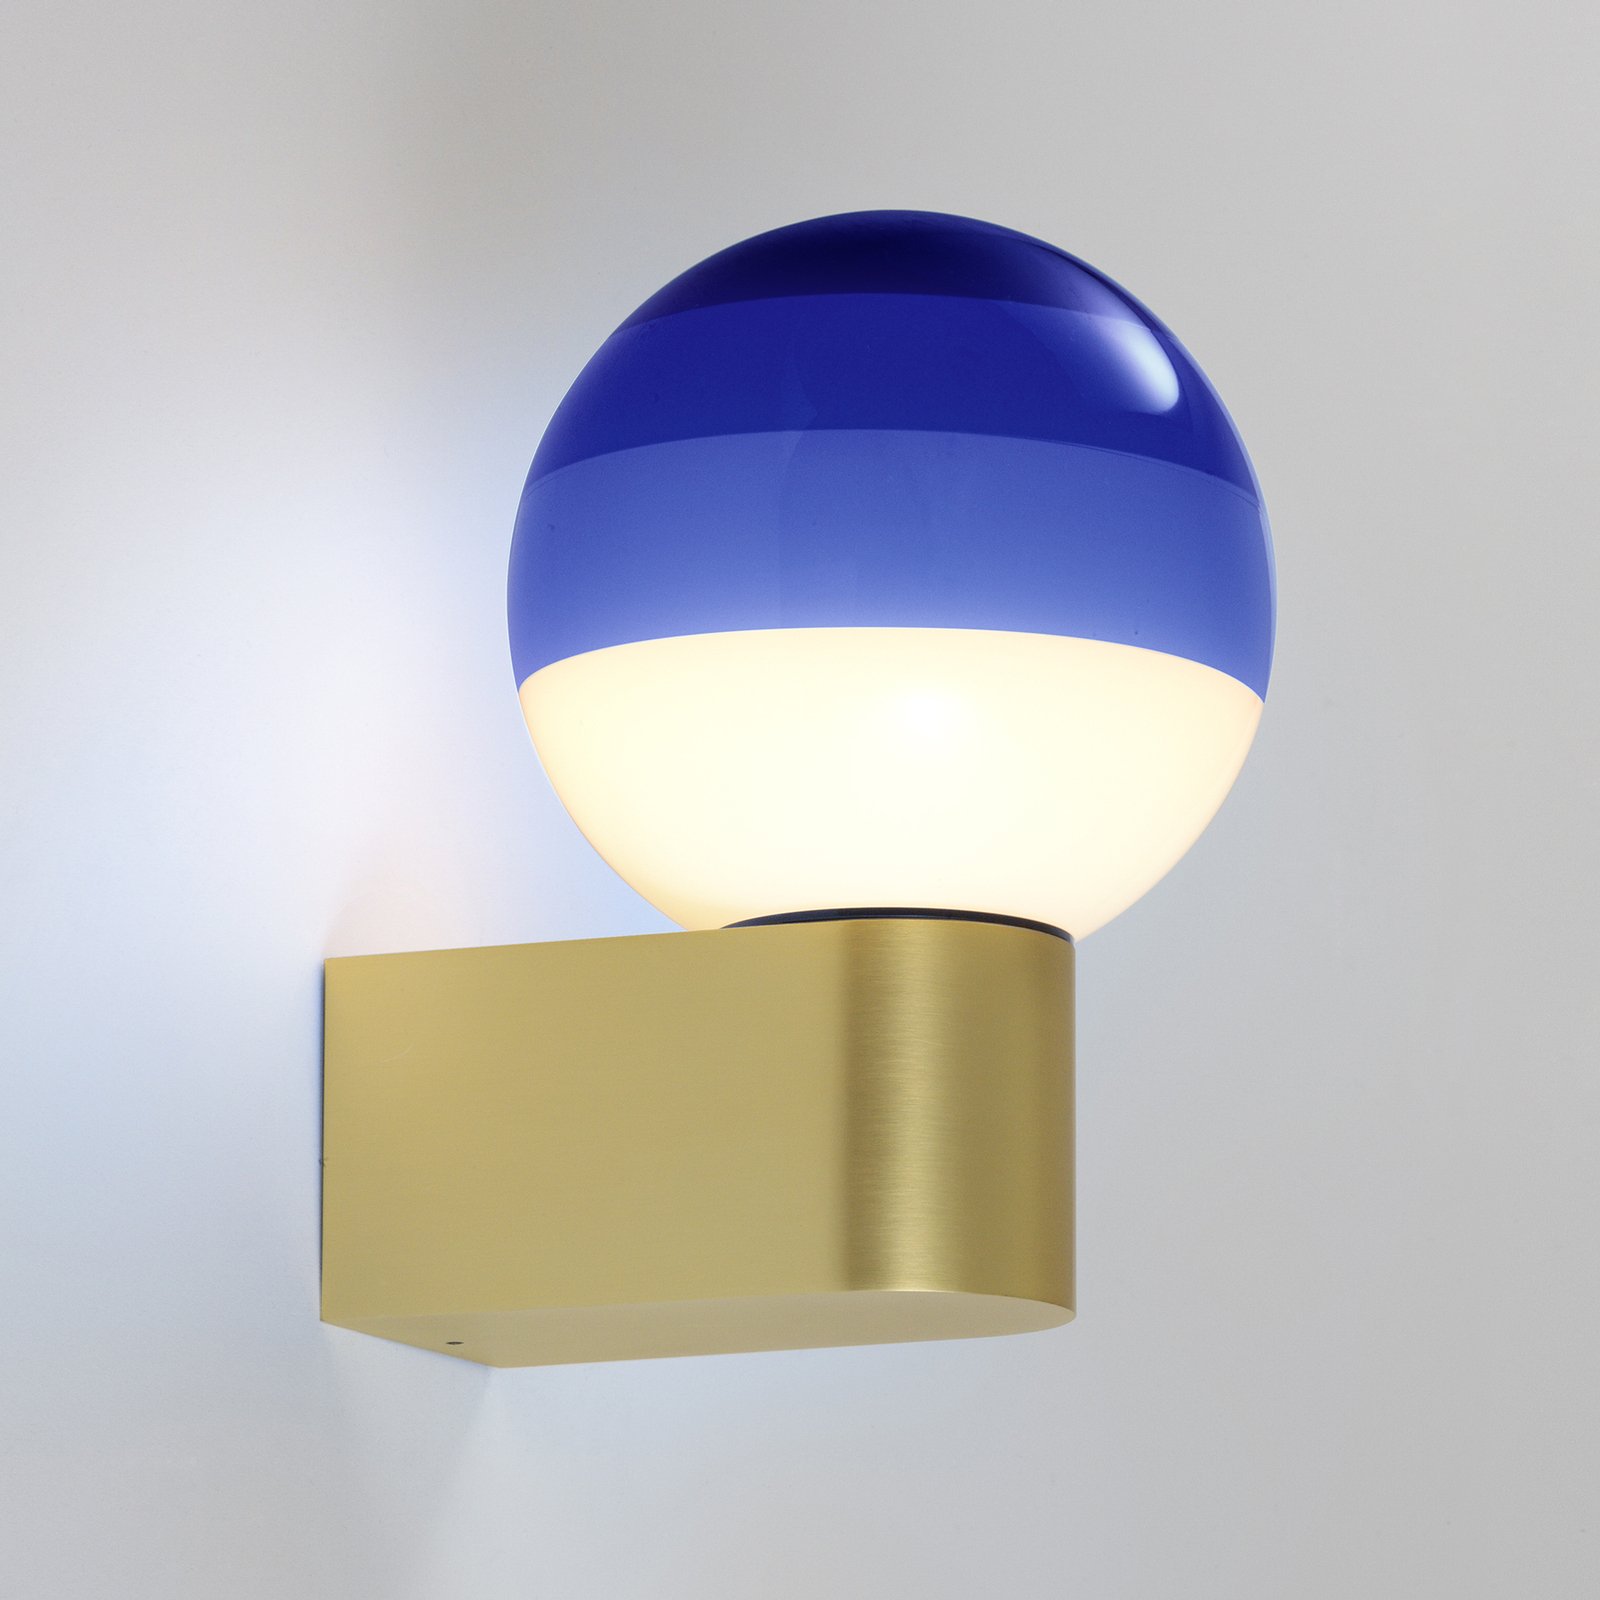 MARSET Dipping Light A1 LED wall lamp, blue/gold